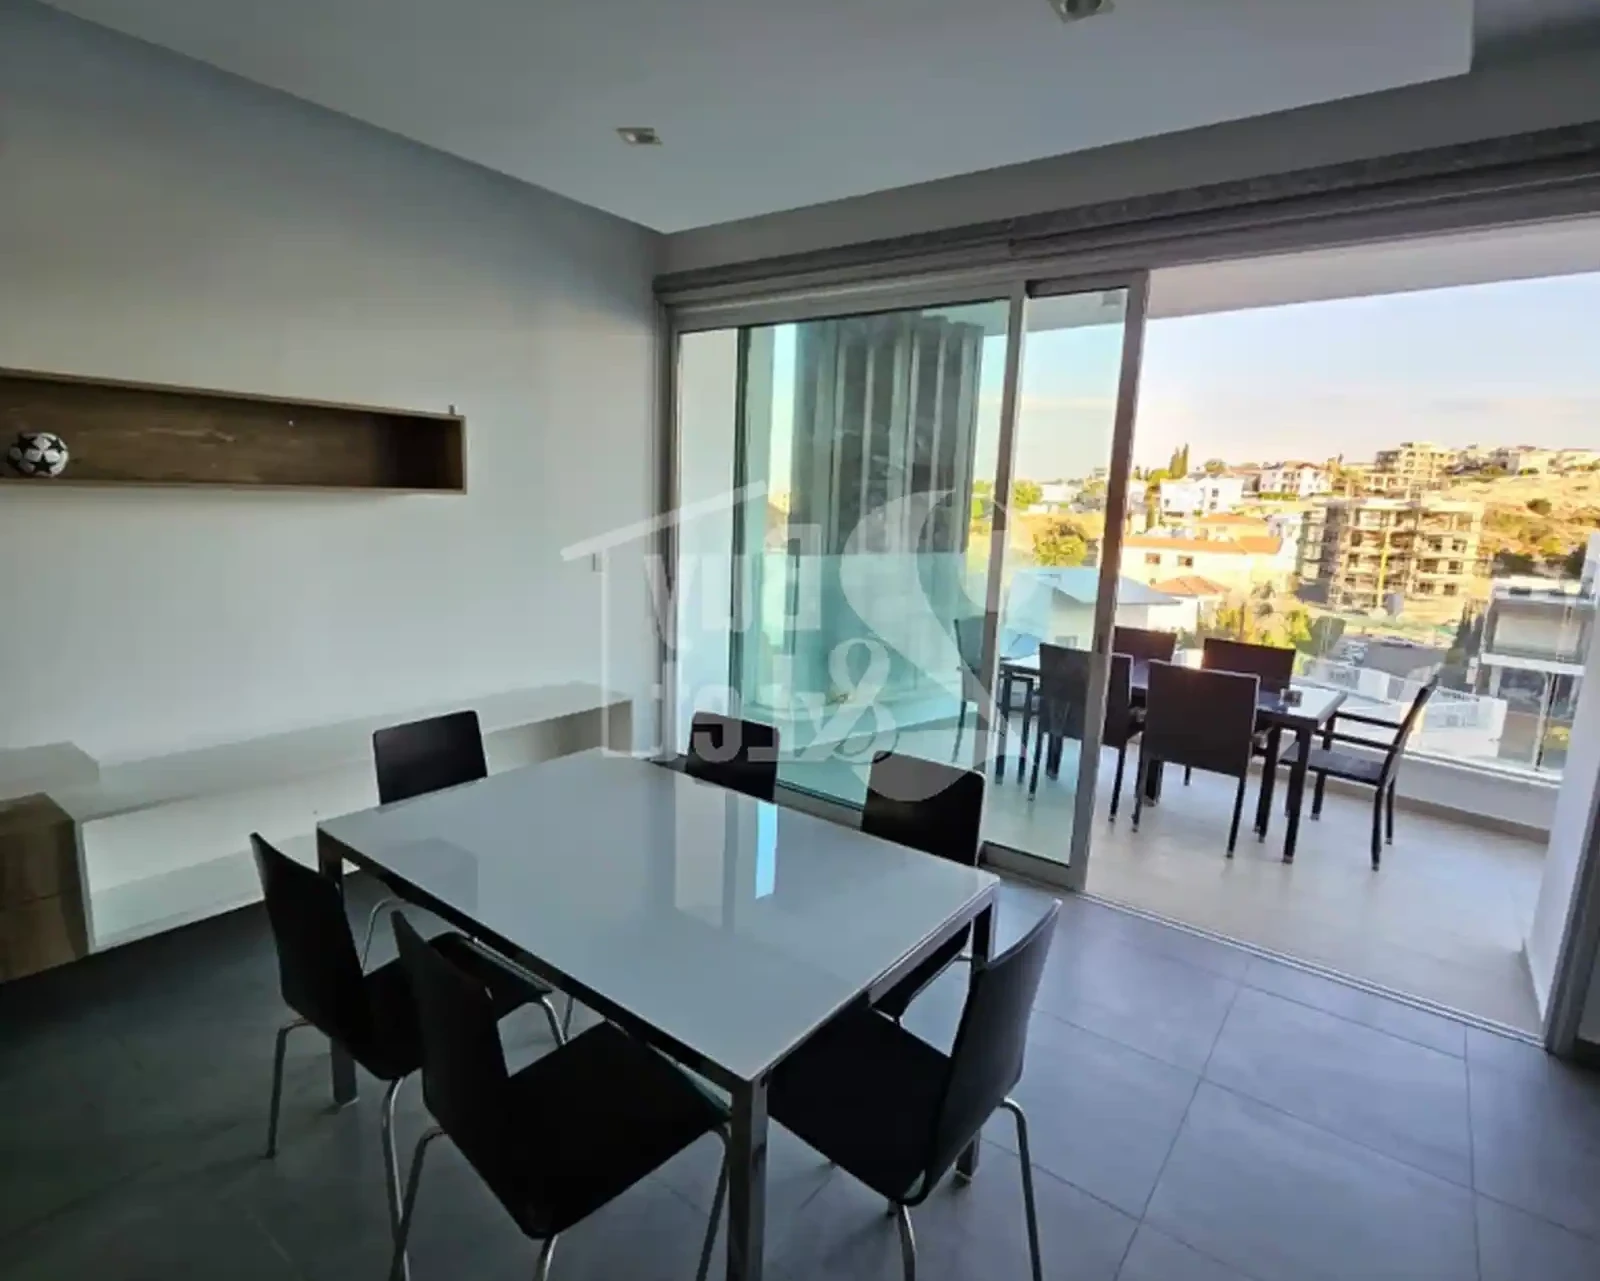 2-bedroom apartment to rent €1.900, image 1